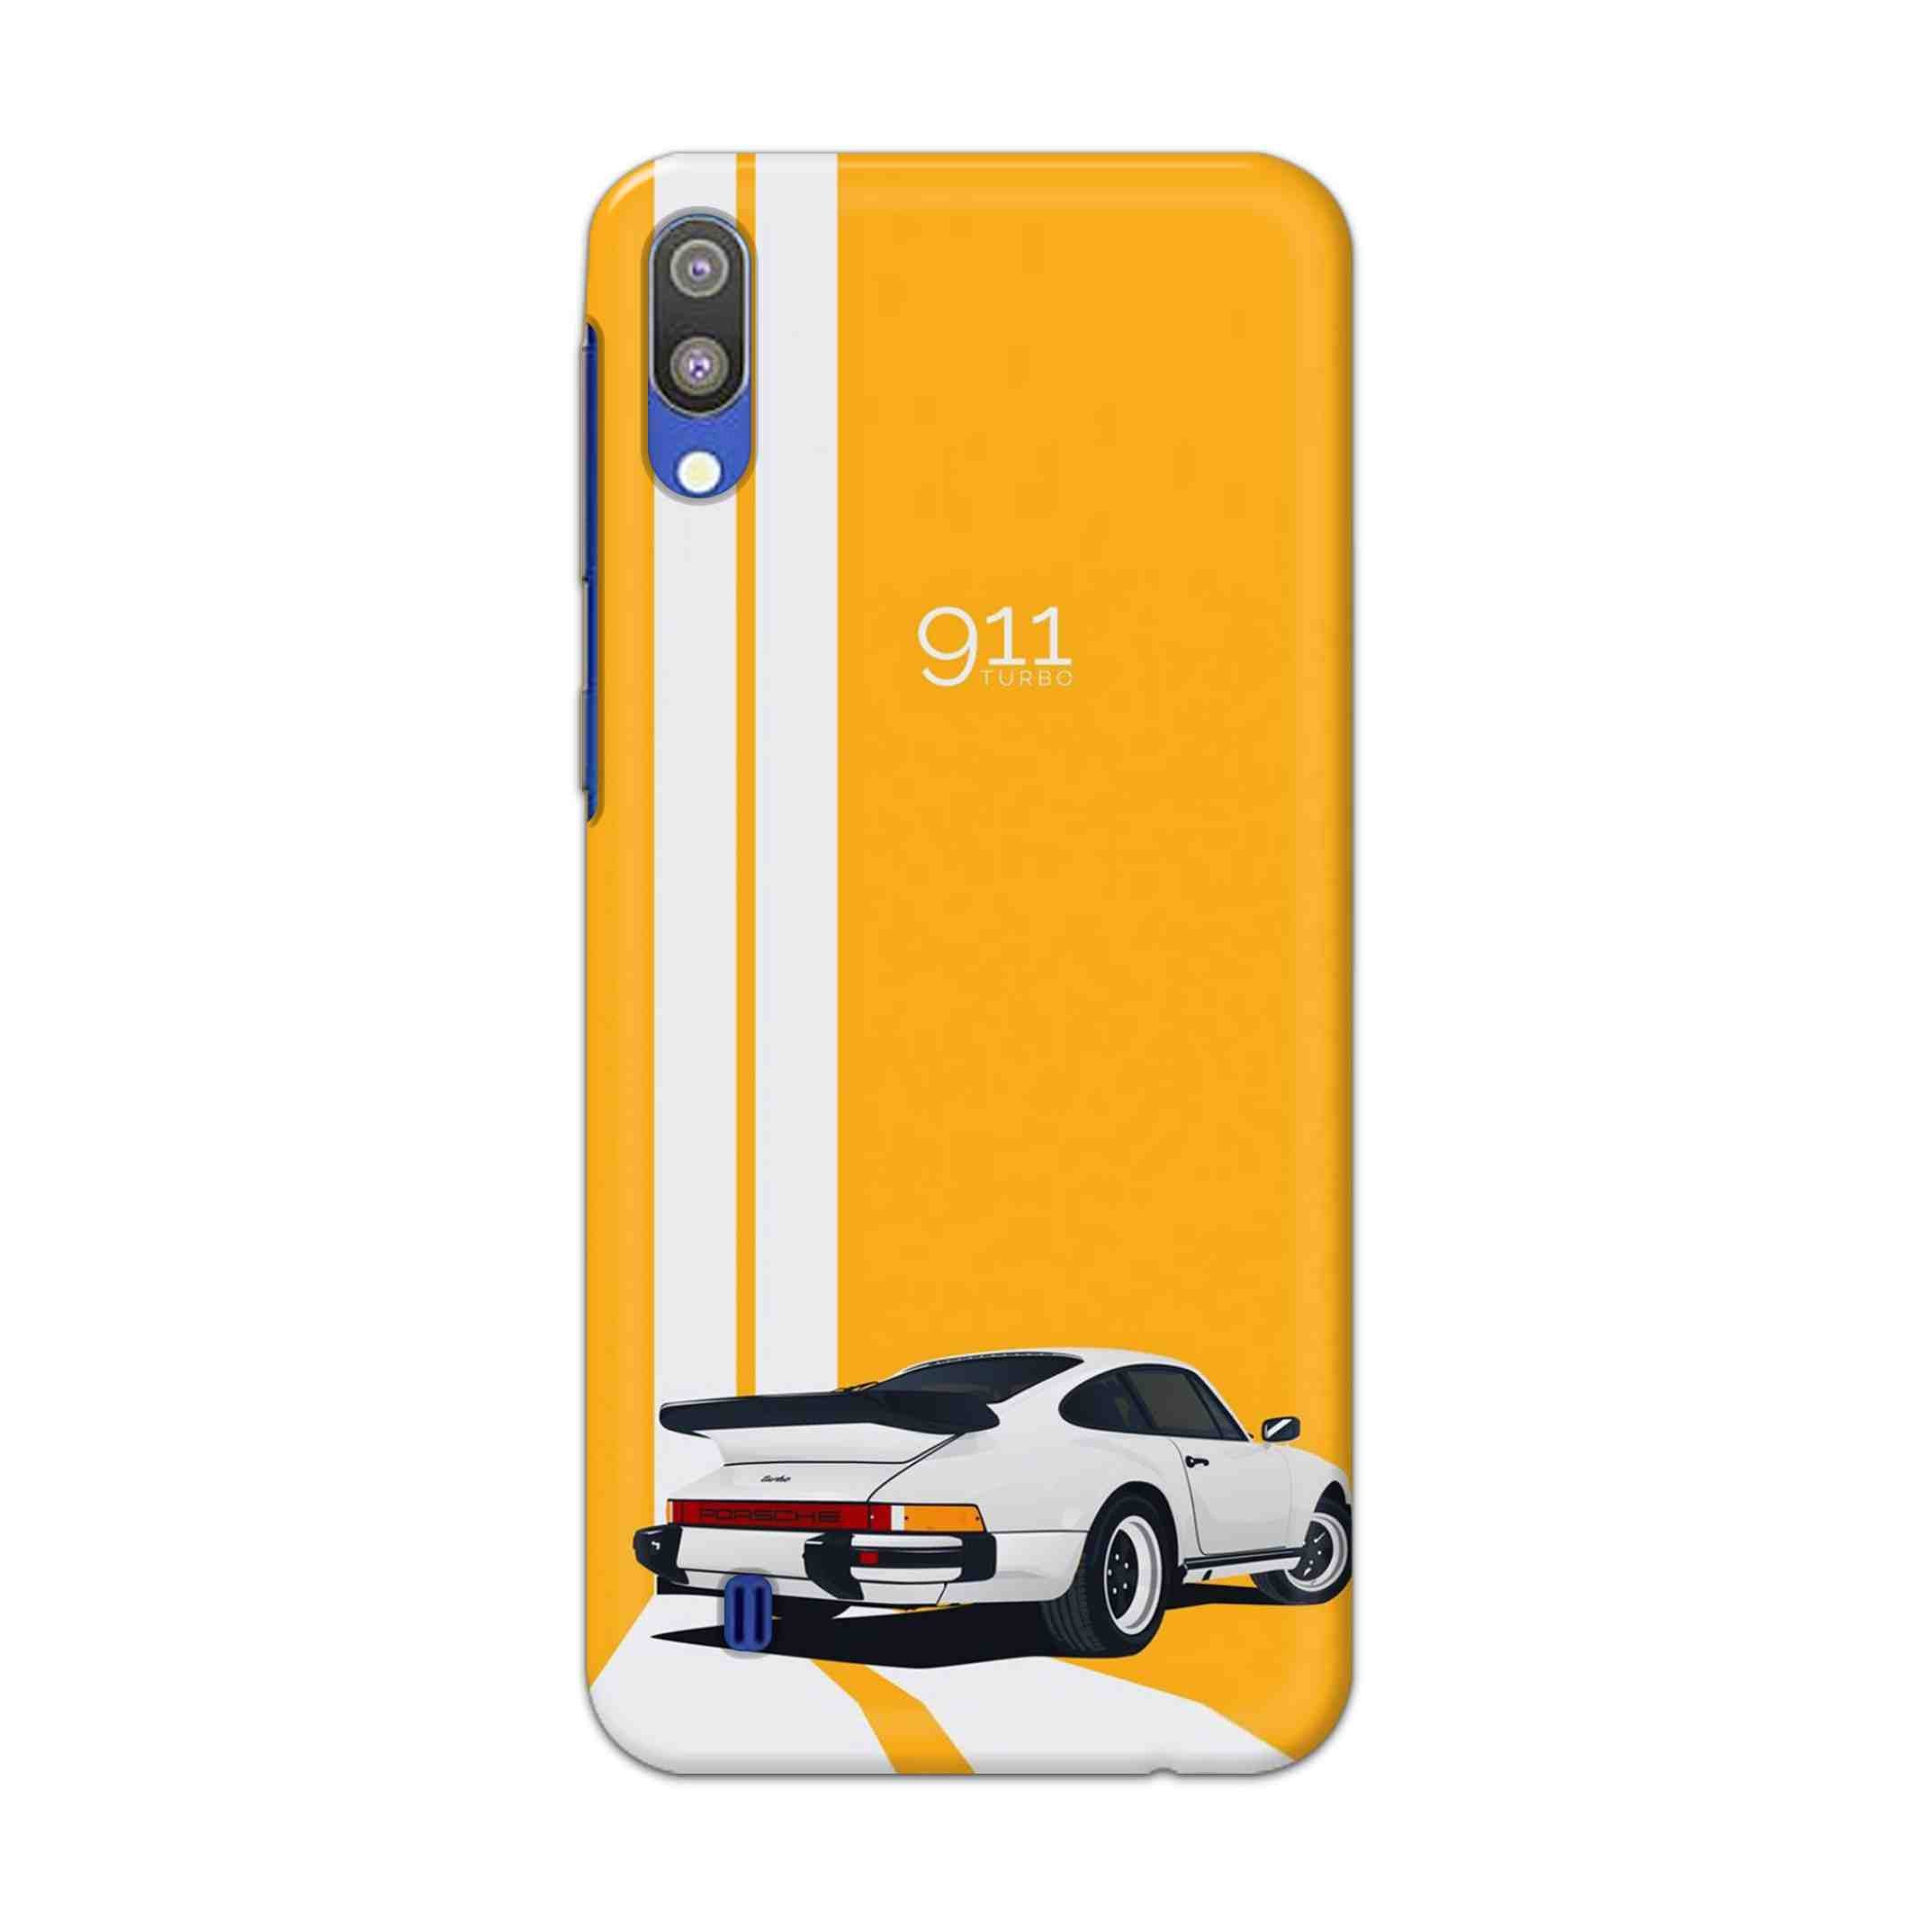 Buy 911 Gt Porche Hard Back Mobile Phone Case Cover For Samsung Galaxy M10 Online